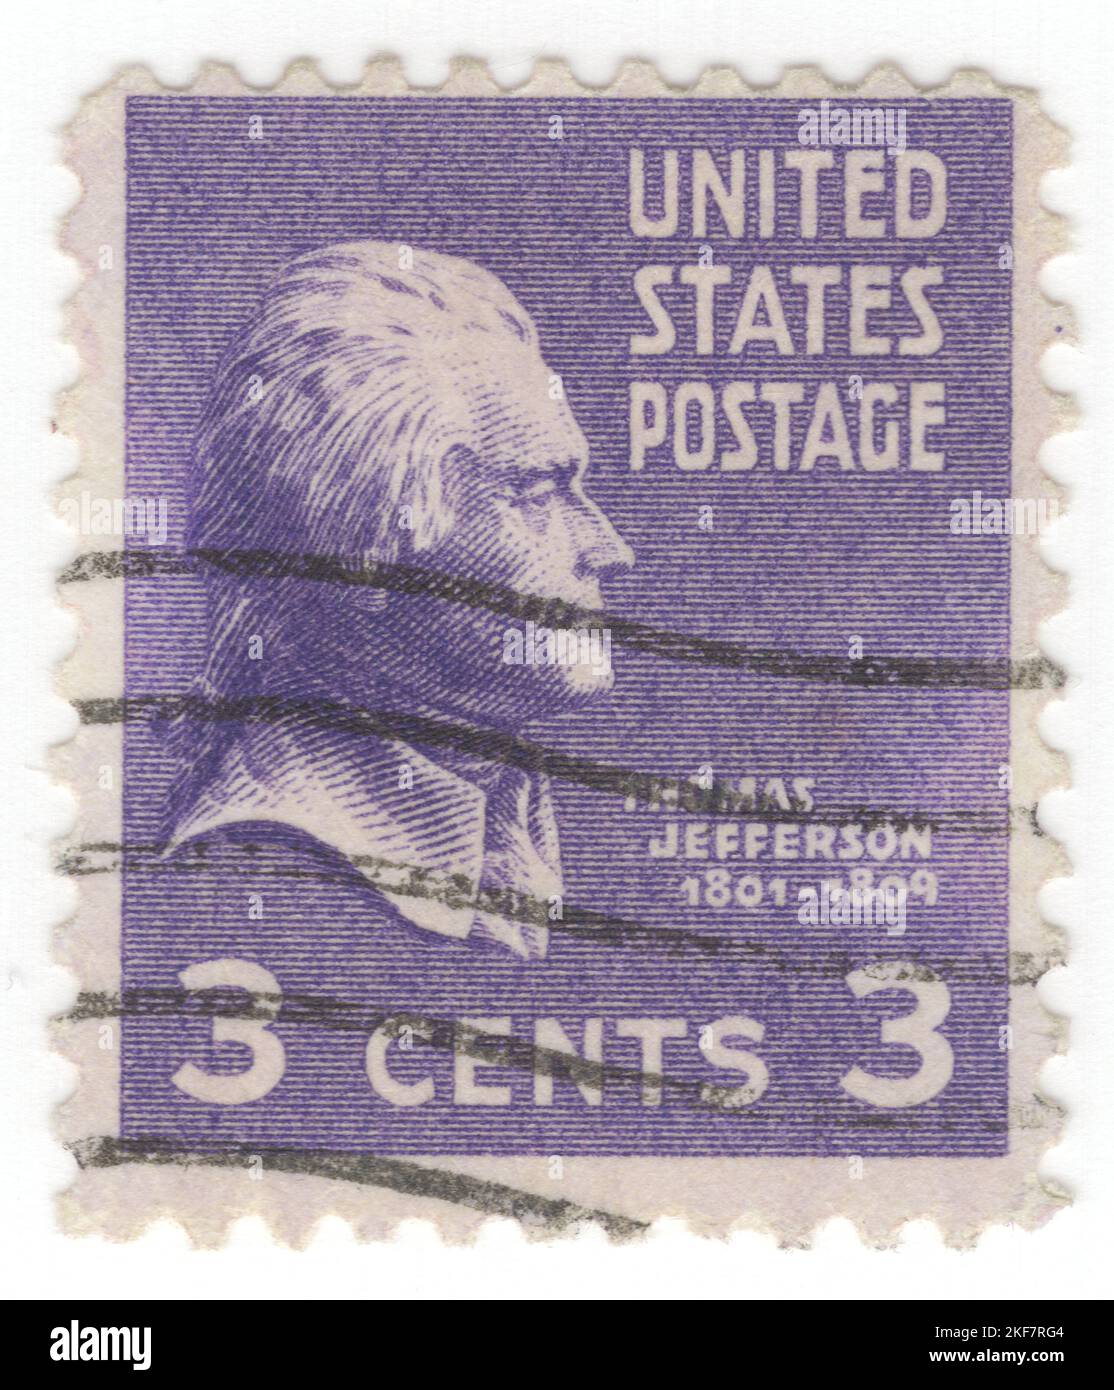 USA - 1938: An 3 cents deep violet postage stamp depicting portrait of Thomas Jefferson, American statesman, diplomat, lawyer, architect, philosopher, and Founding Father who served as the third president of the United States from 1801 to 1809. He was previously the second vice president under John Adams and the first United States secretary of state under George Washington. The principal author of the Declaration of Independence, Jefferson was a proponent of democracy, republicanism, and individual rights, motivating American colonists to break from the Kingdom of Great Britain Stock Photo